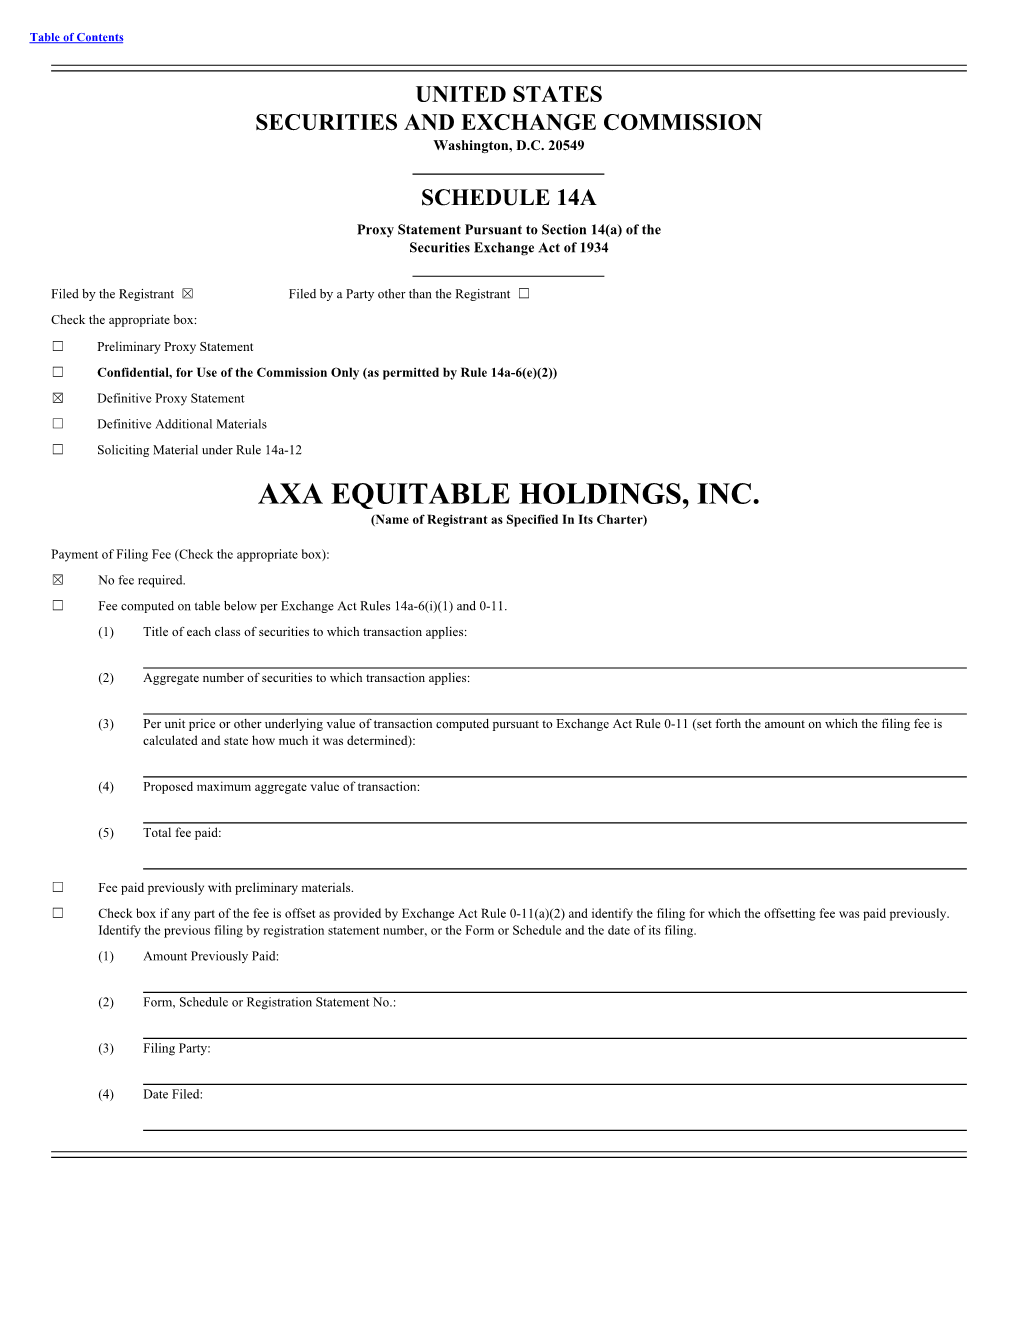 AXA EQUITABLE HOLDINGS, INC. (Name of Registrant As Specified in Its Charter)